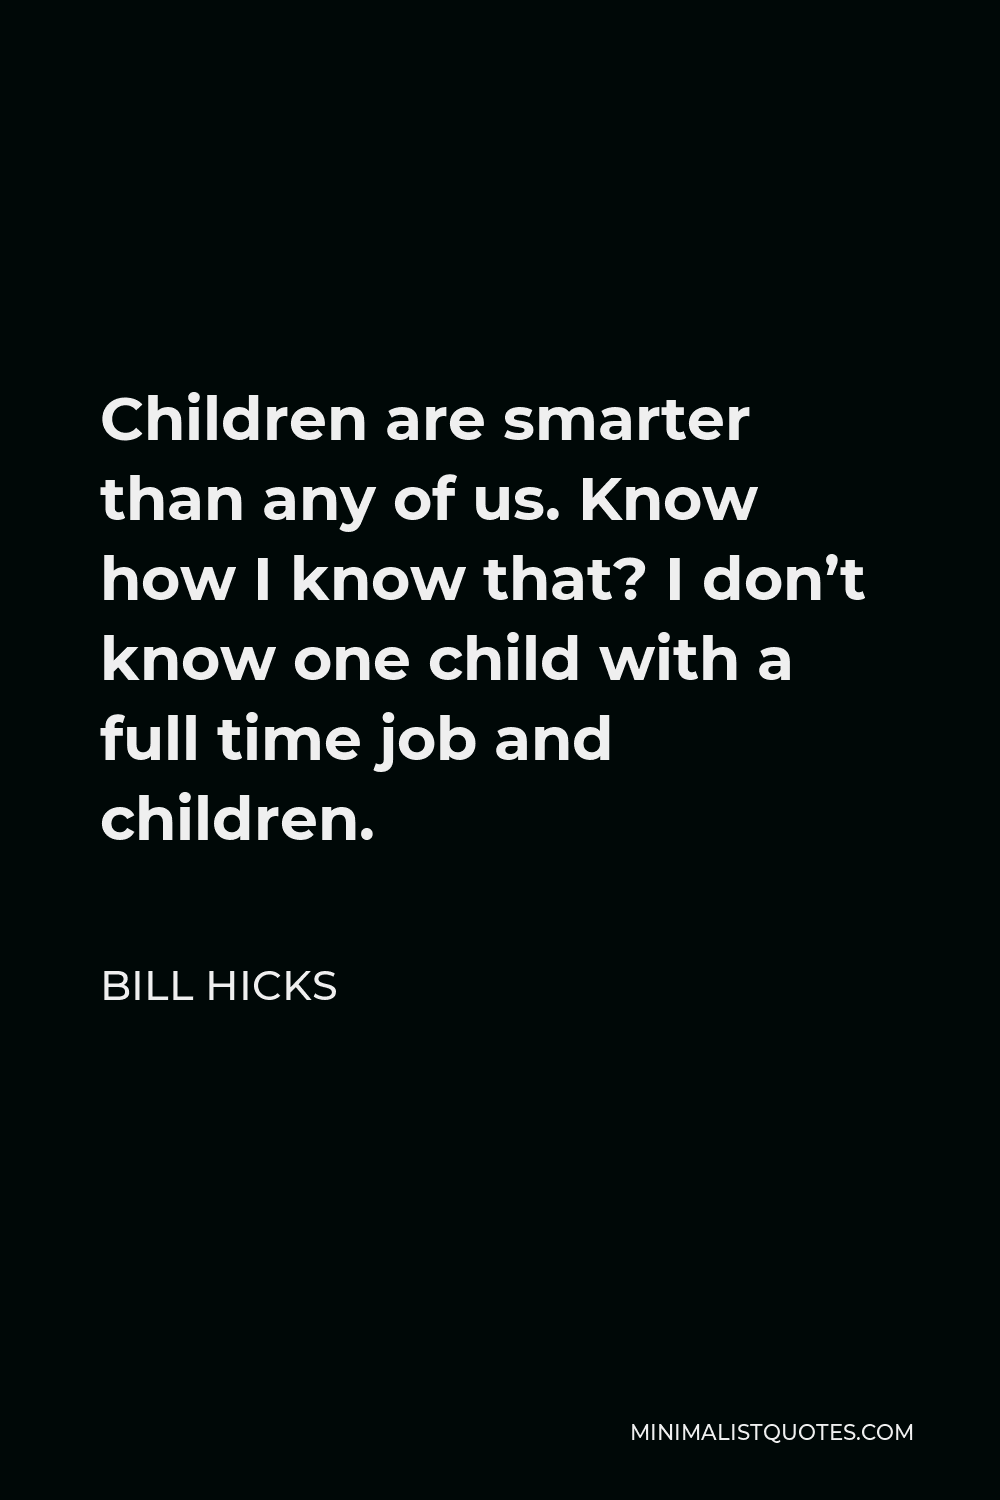 Bill Hicks Quote - Children are smarter than any of us. Know how I know that? I don’t know one child with a full time job and children.